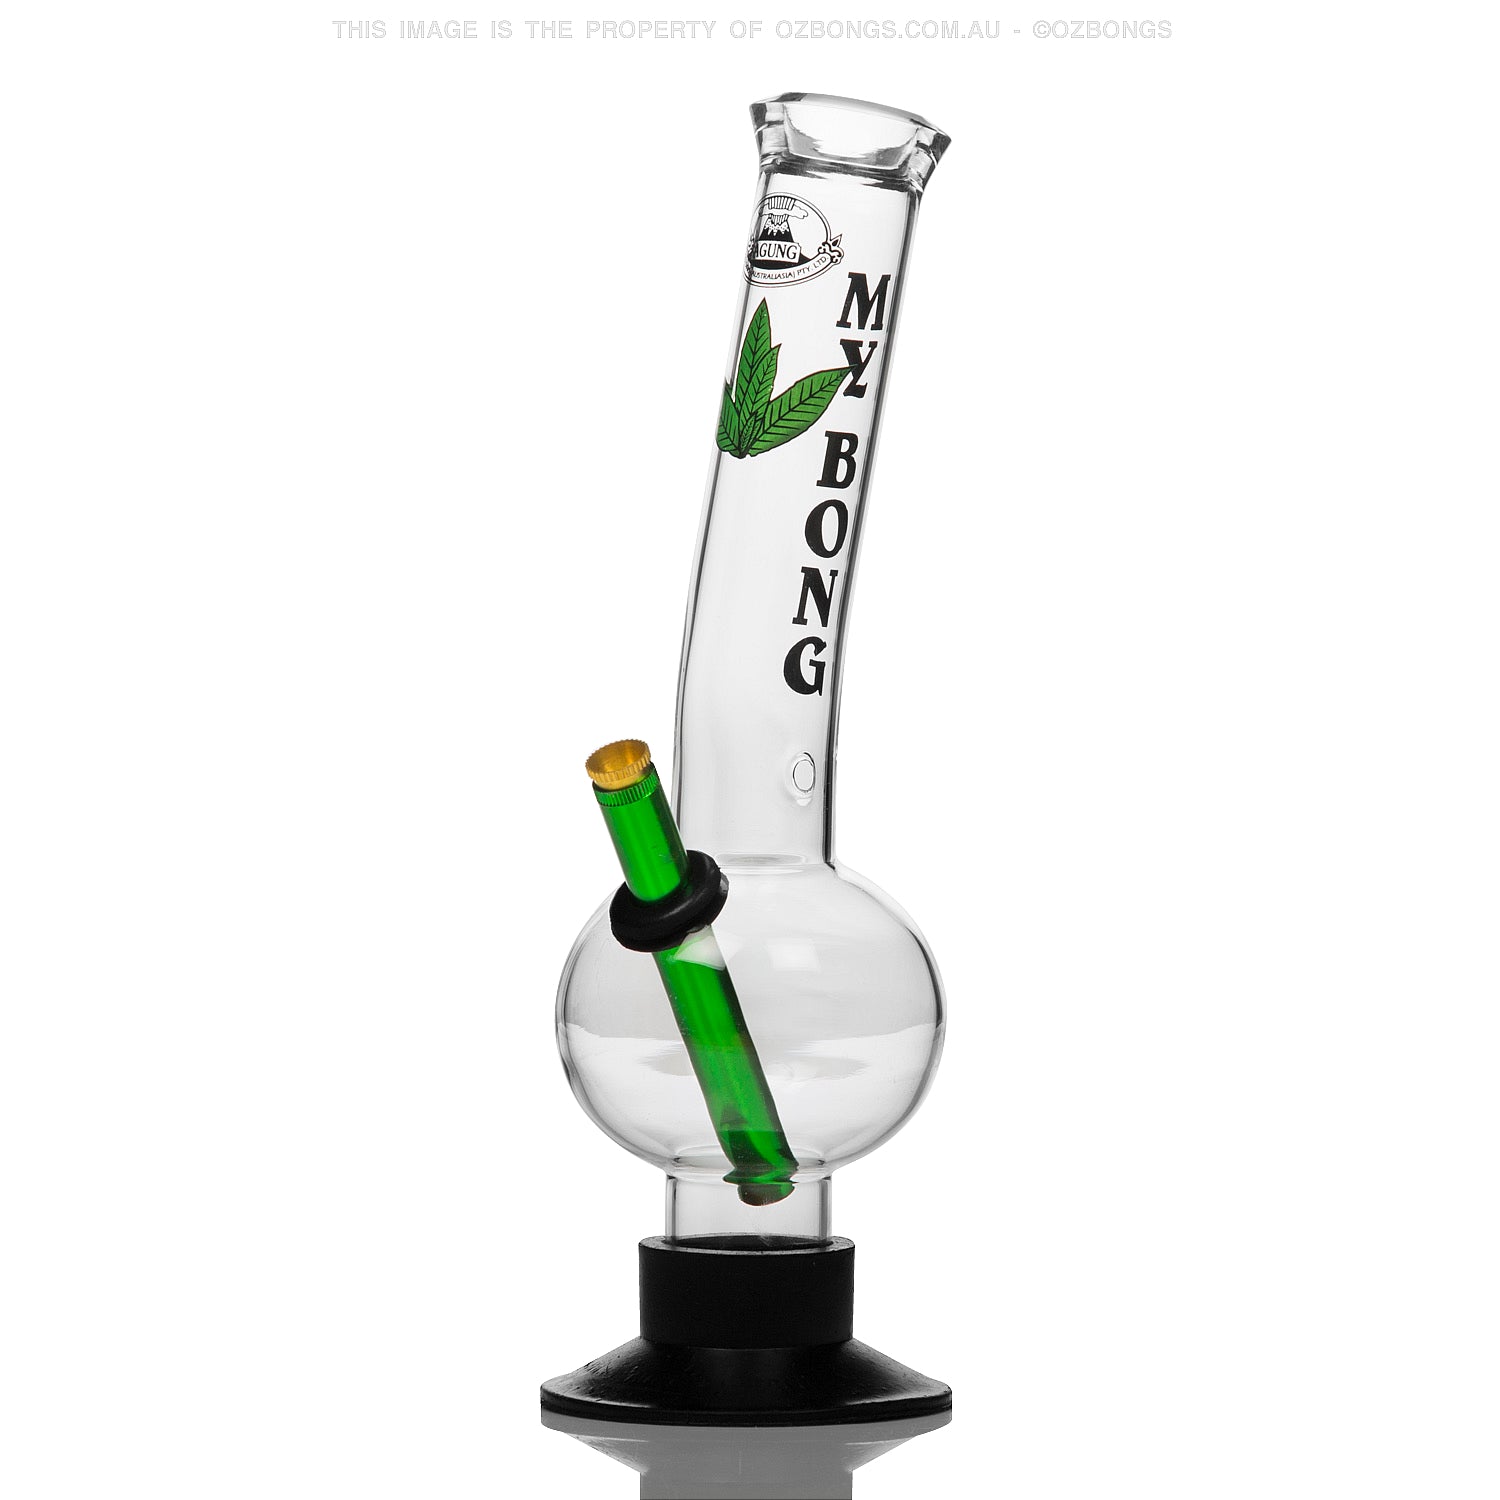 32cm tall cheap glass bong from Agung Australia with my bong decals and weed leaf design.